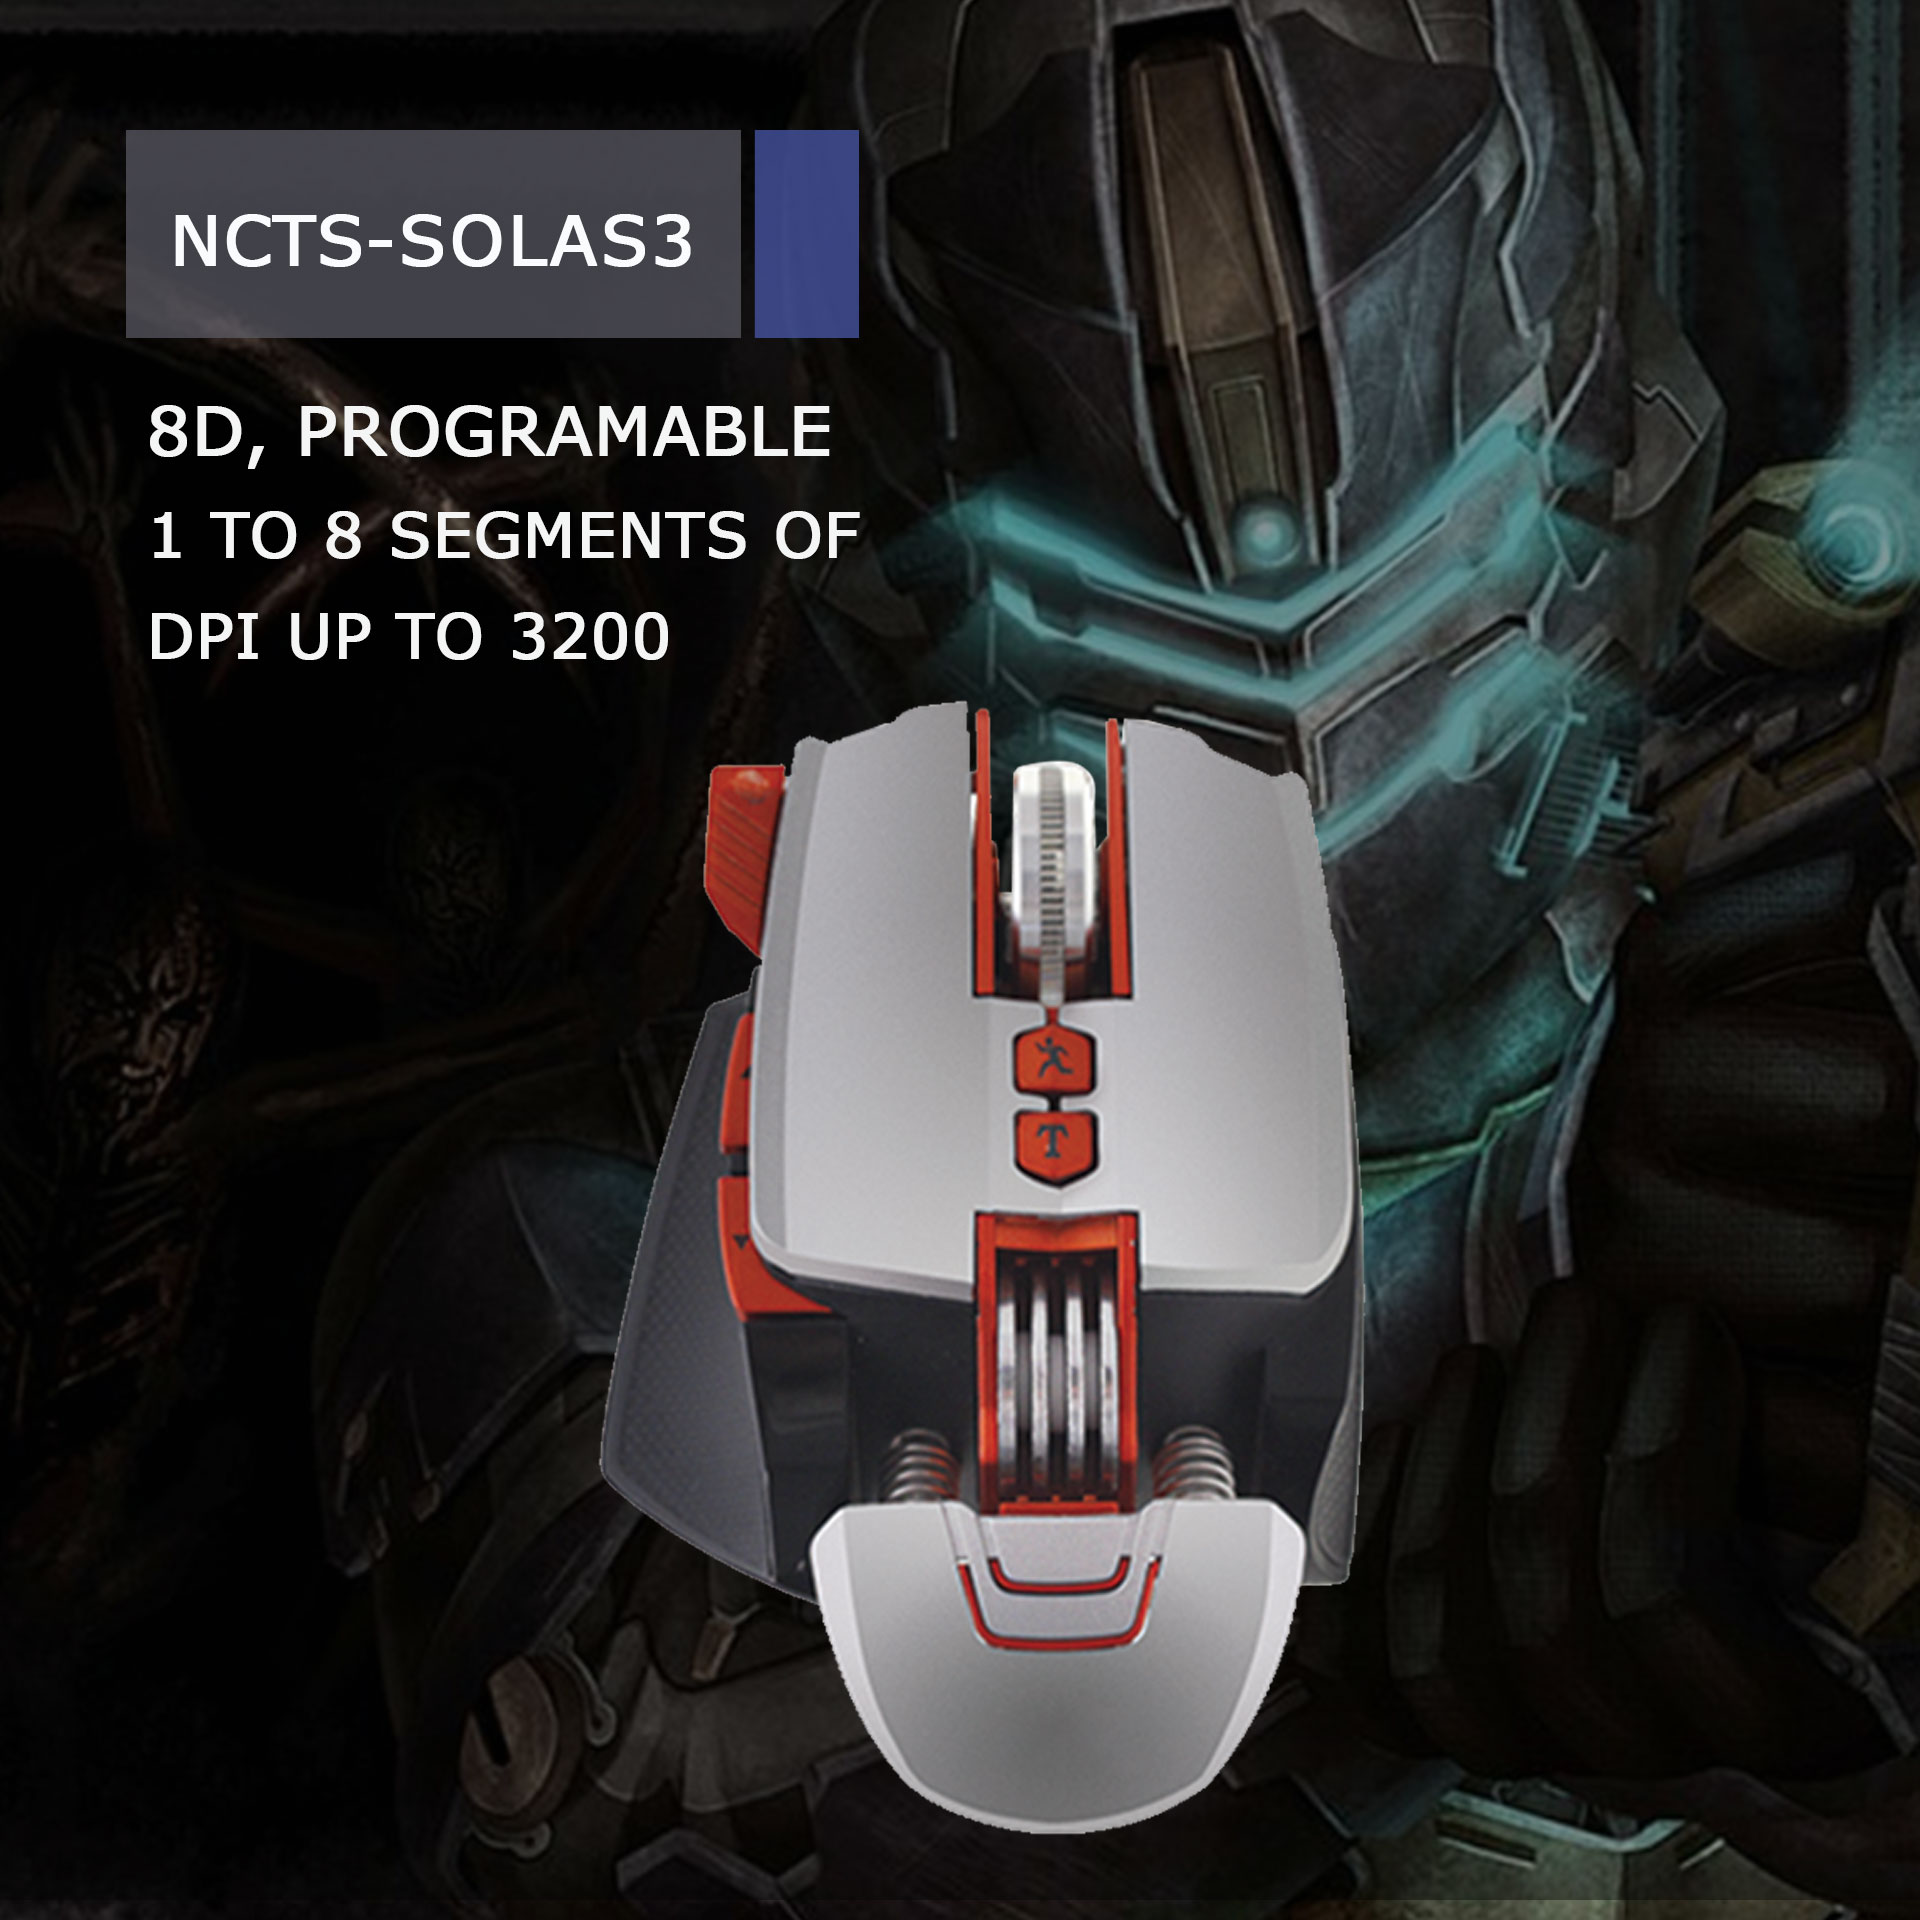 NCTS-SOLAS3